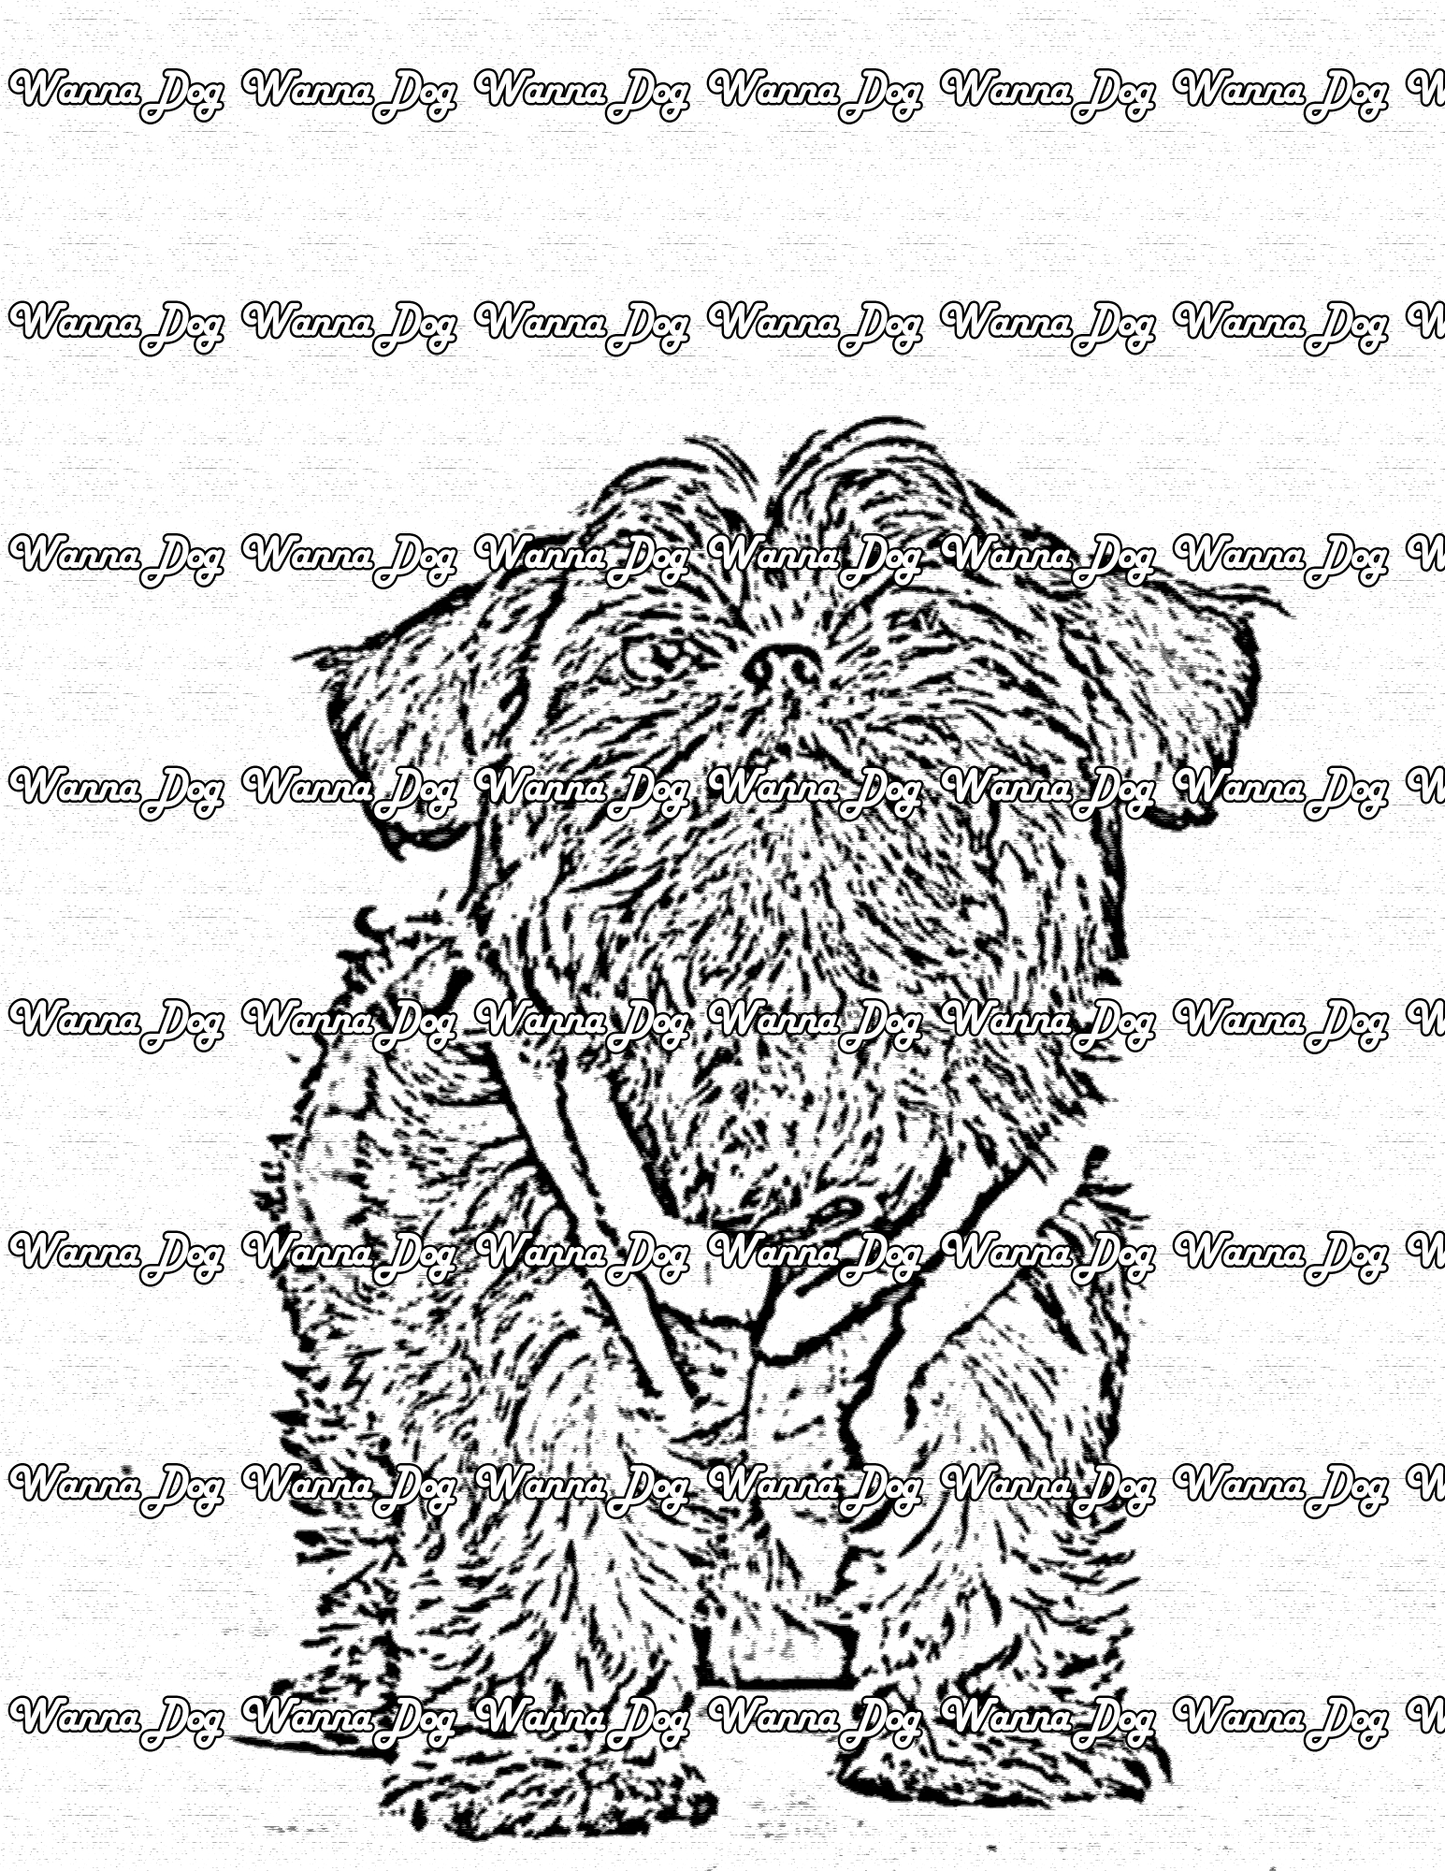 Shih Tzu Coloring Page of a Shih Tzu posing for the camera in a sweater